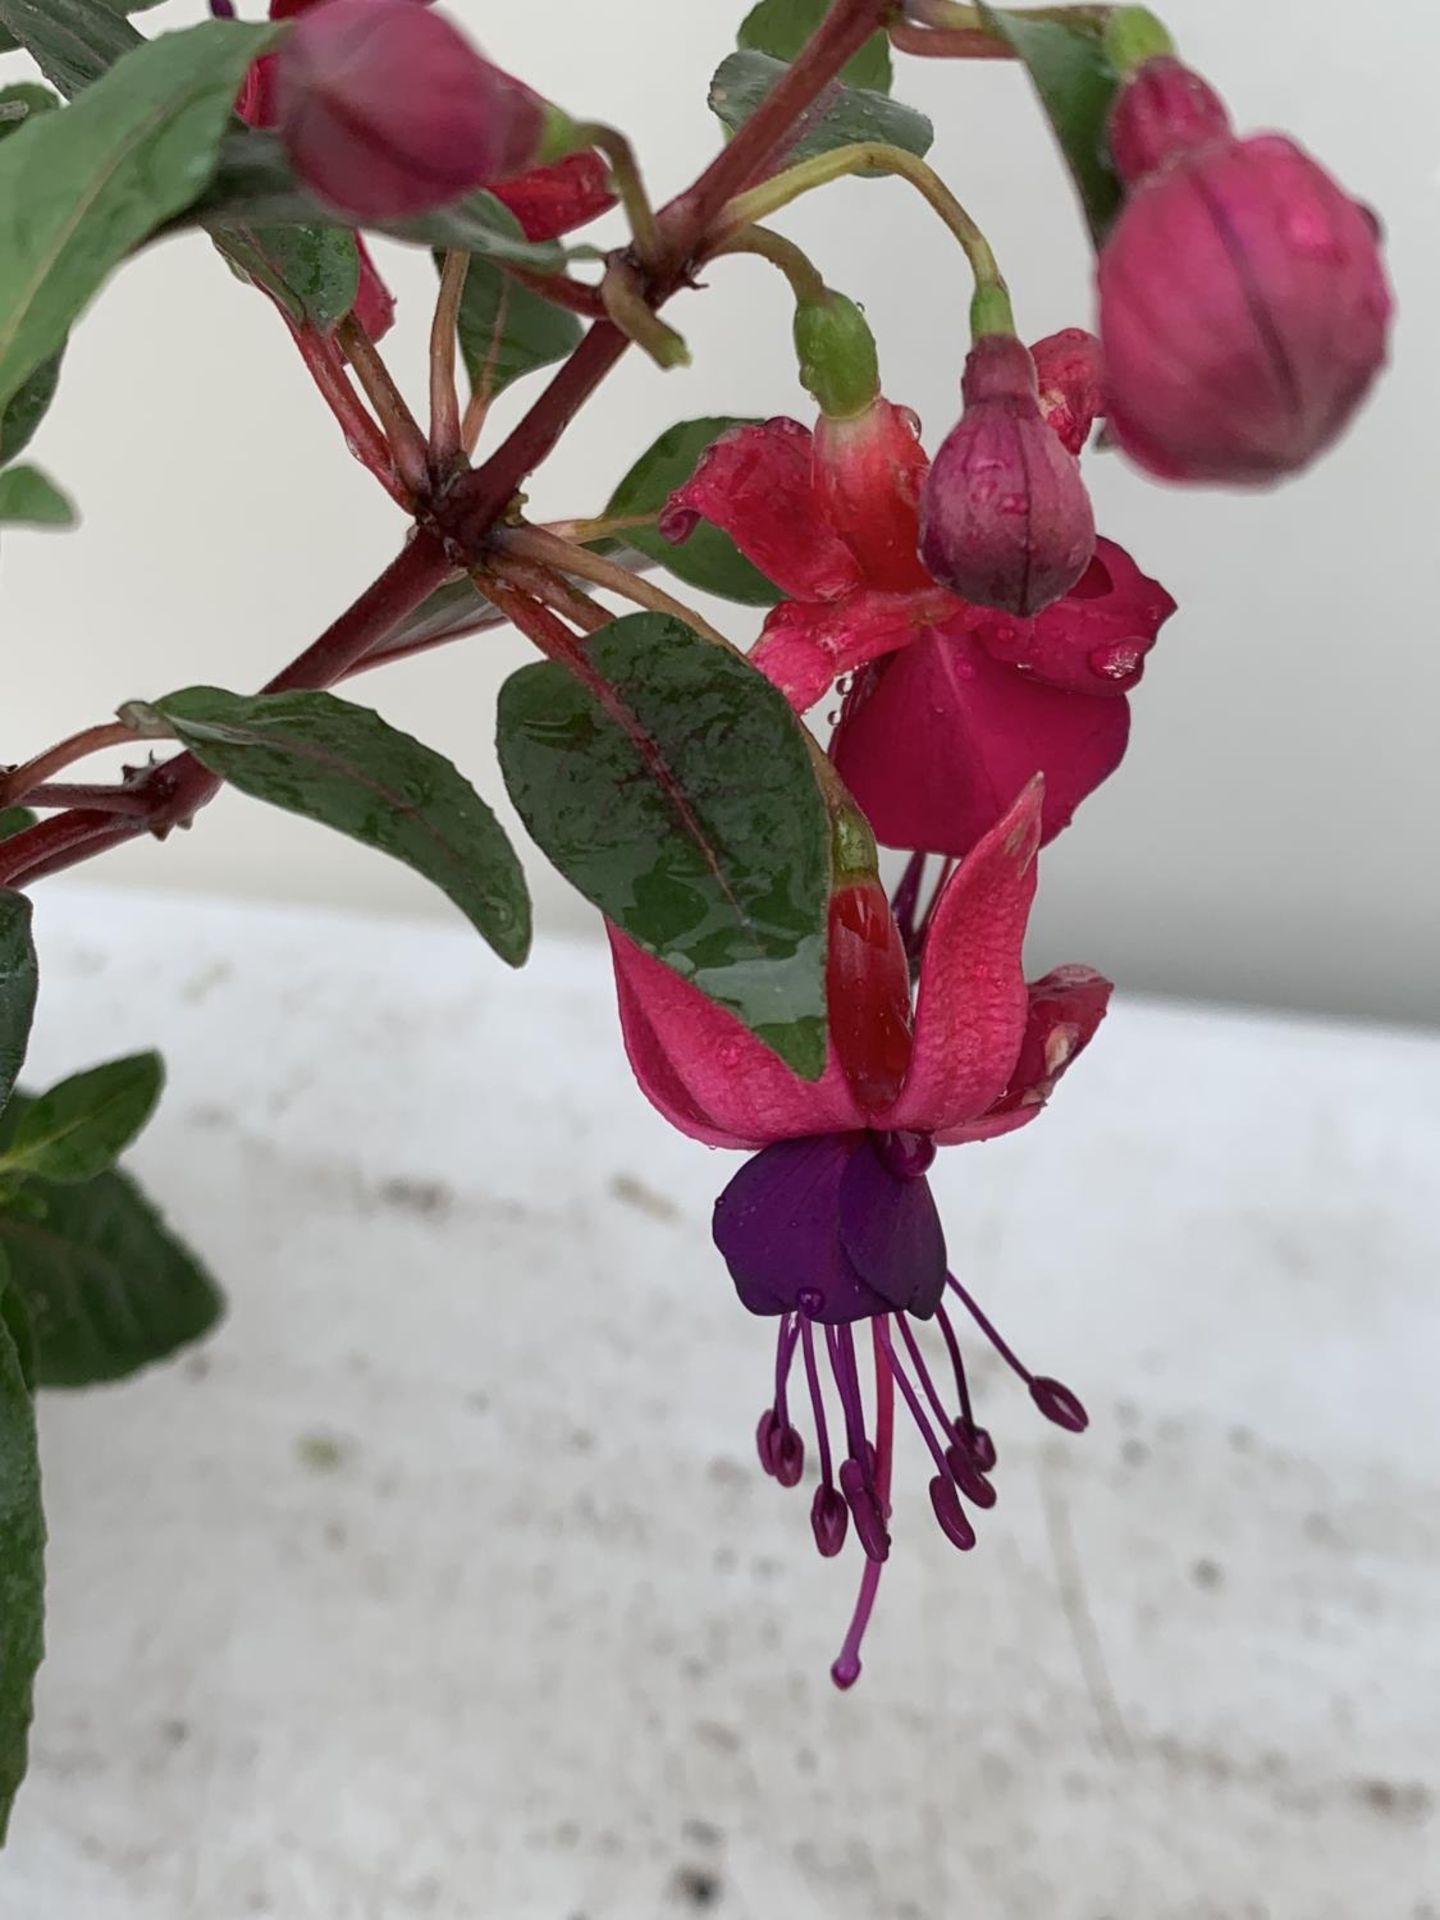 NINE FUCHSIA BELLA IN 20CM POTS 20-30CM TALL TO BE SOLD FOR THE NINE PLUS VAT - Image 4 of 5